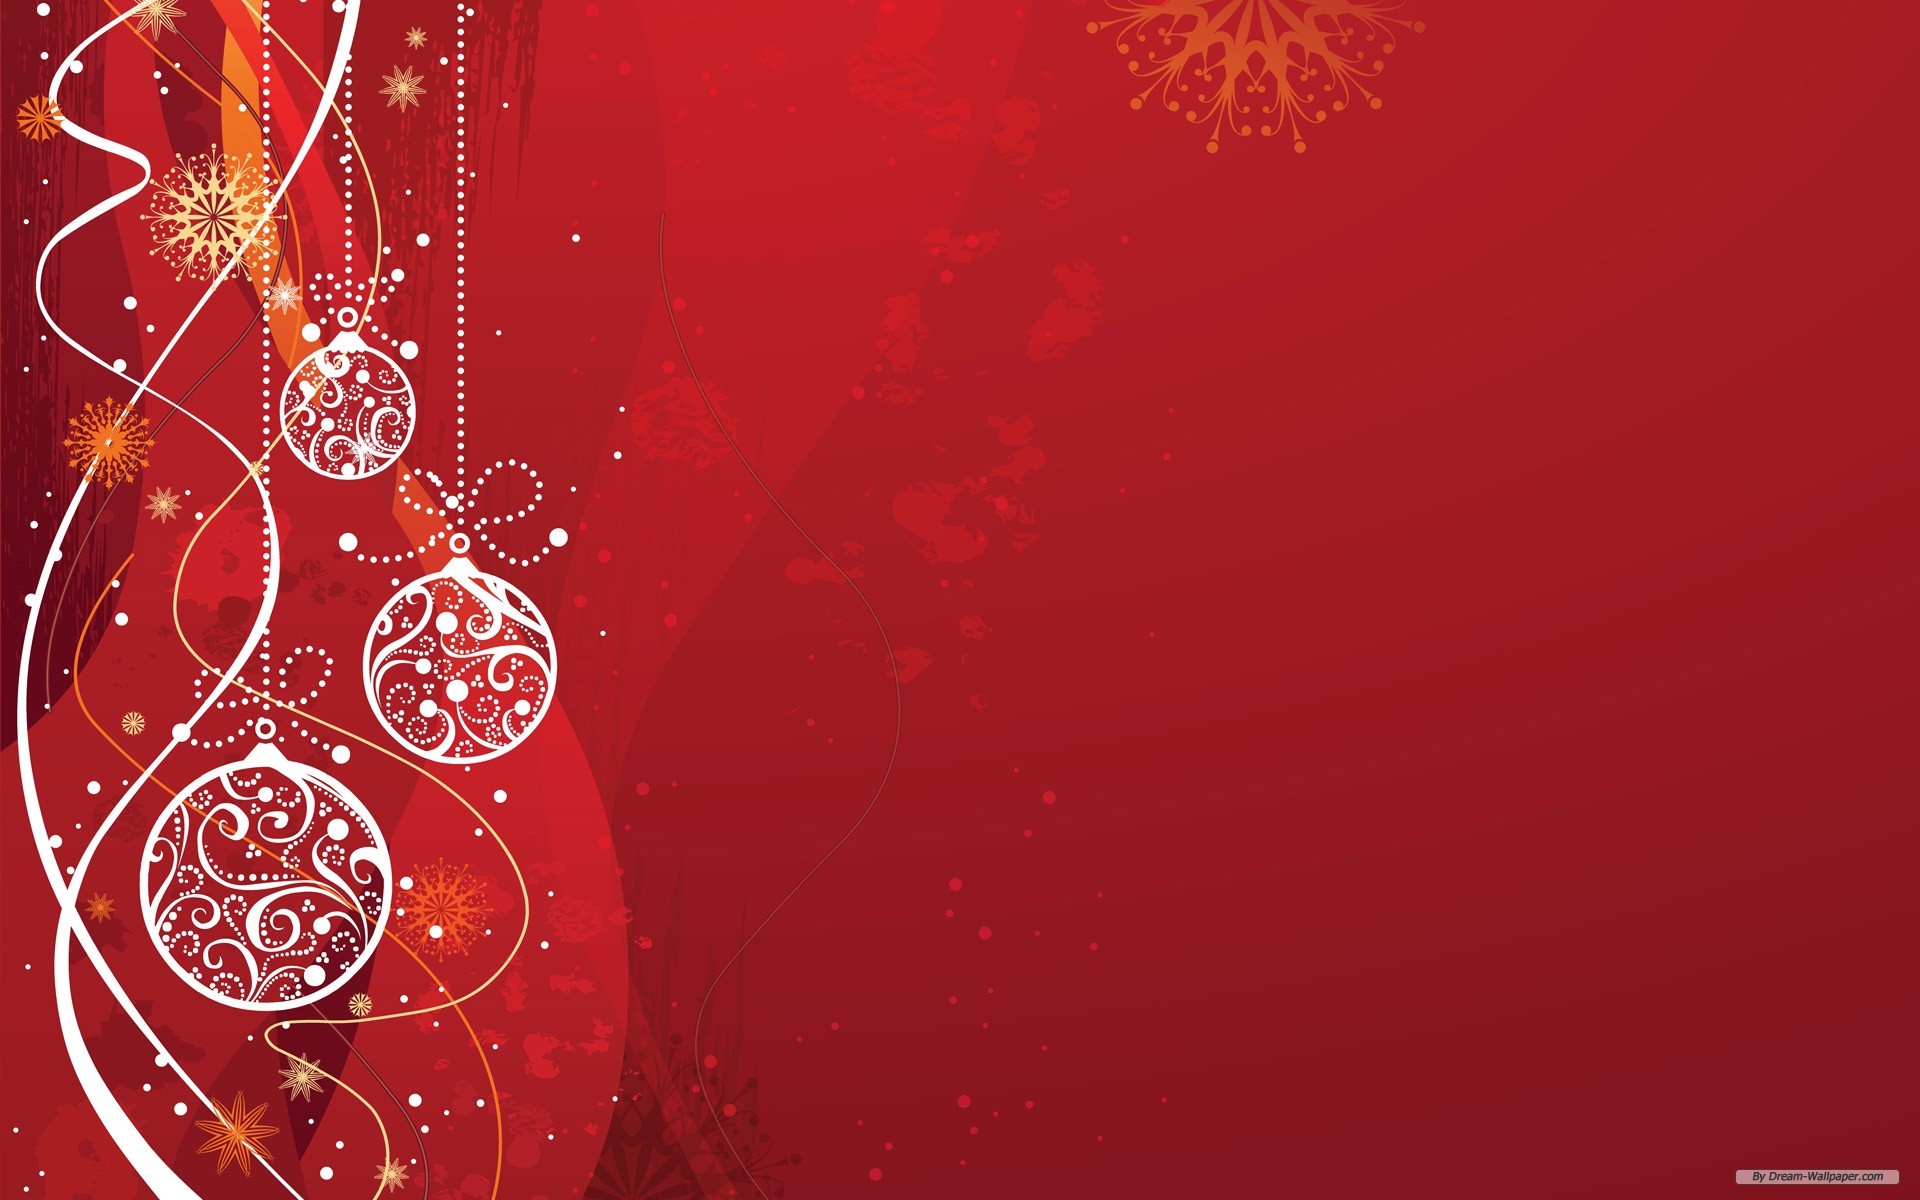 1920x1200 Free Holiday Backgrounds